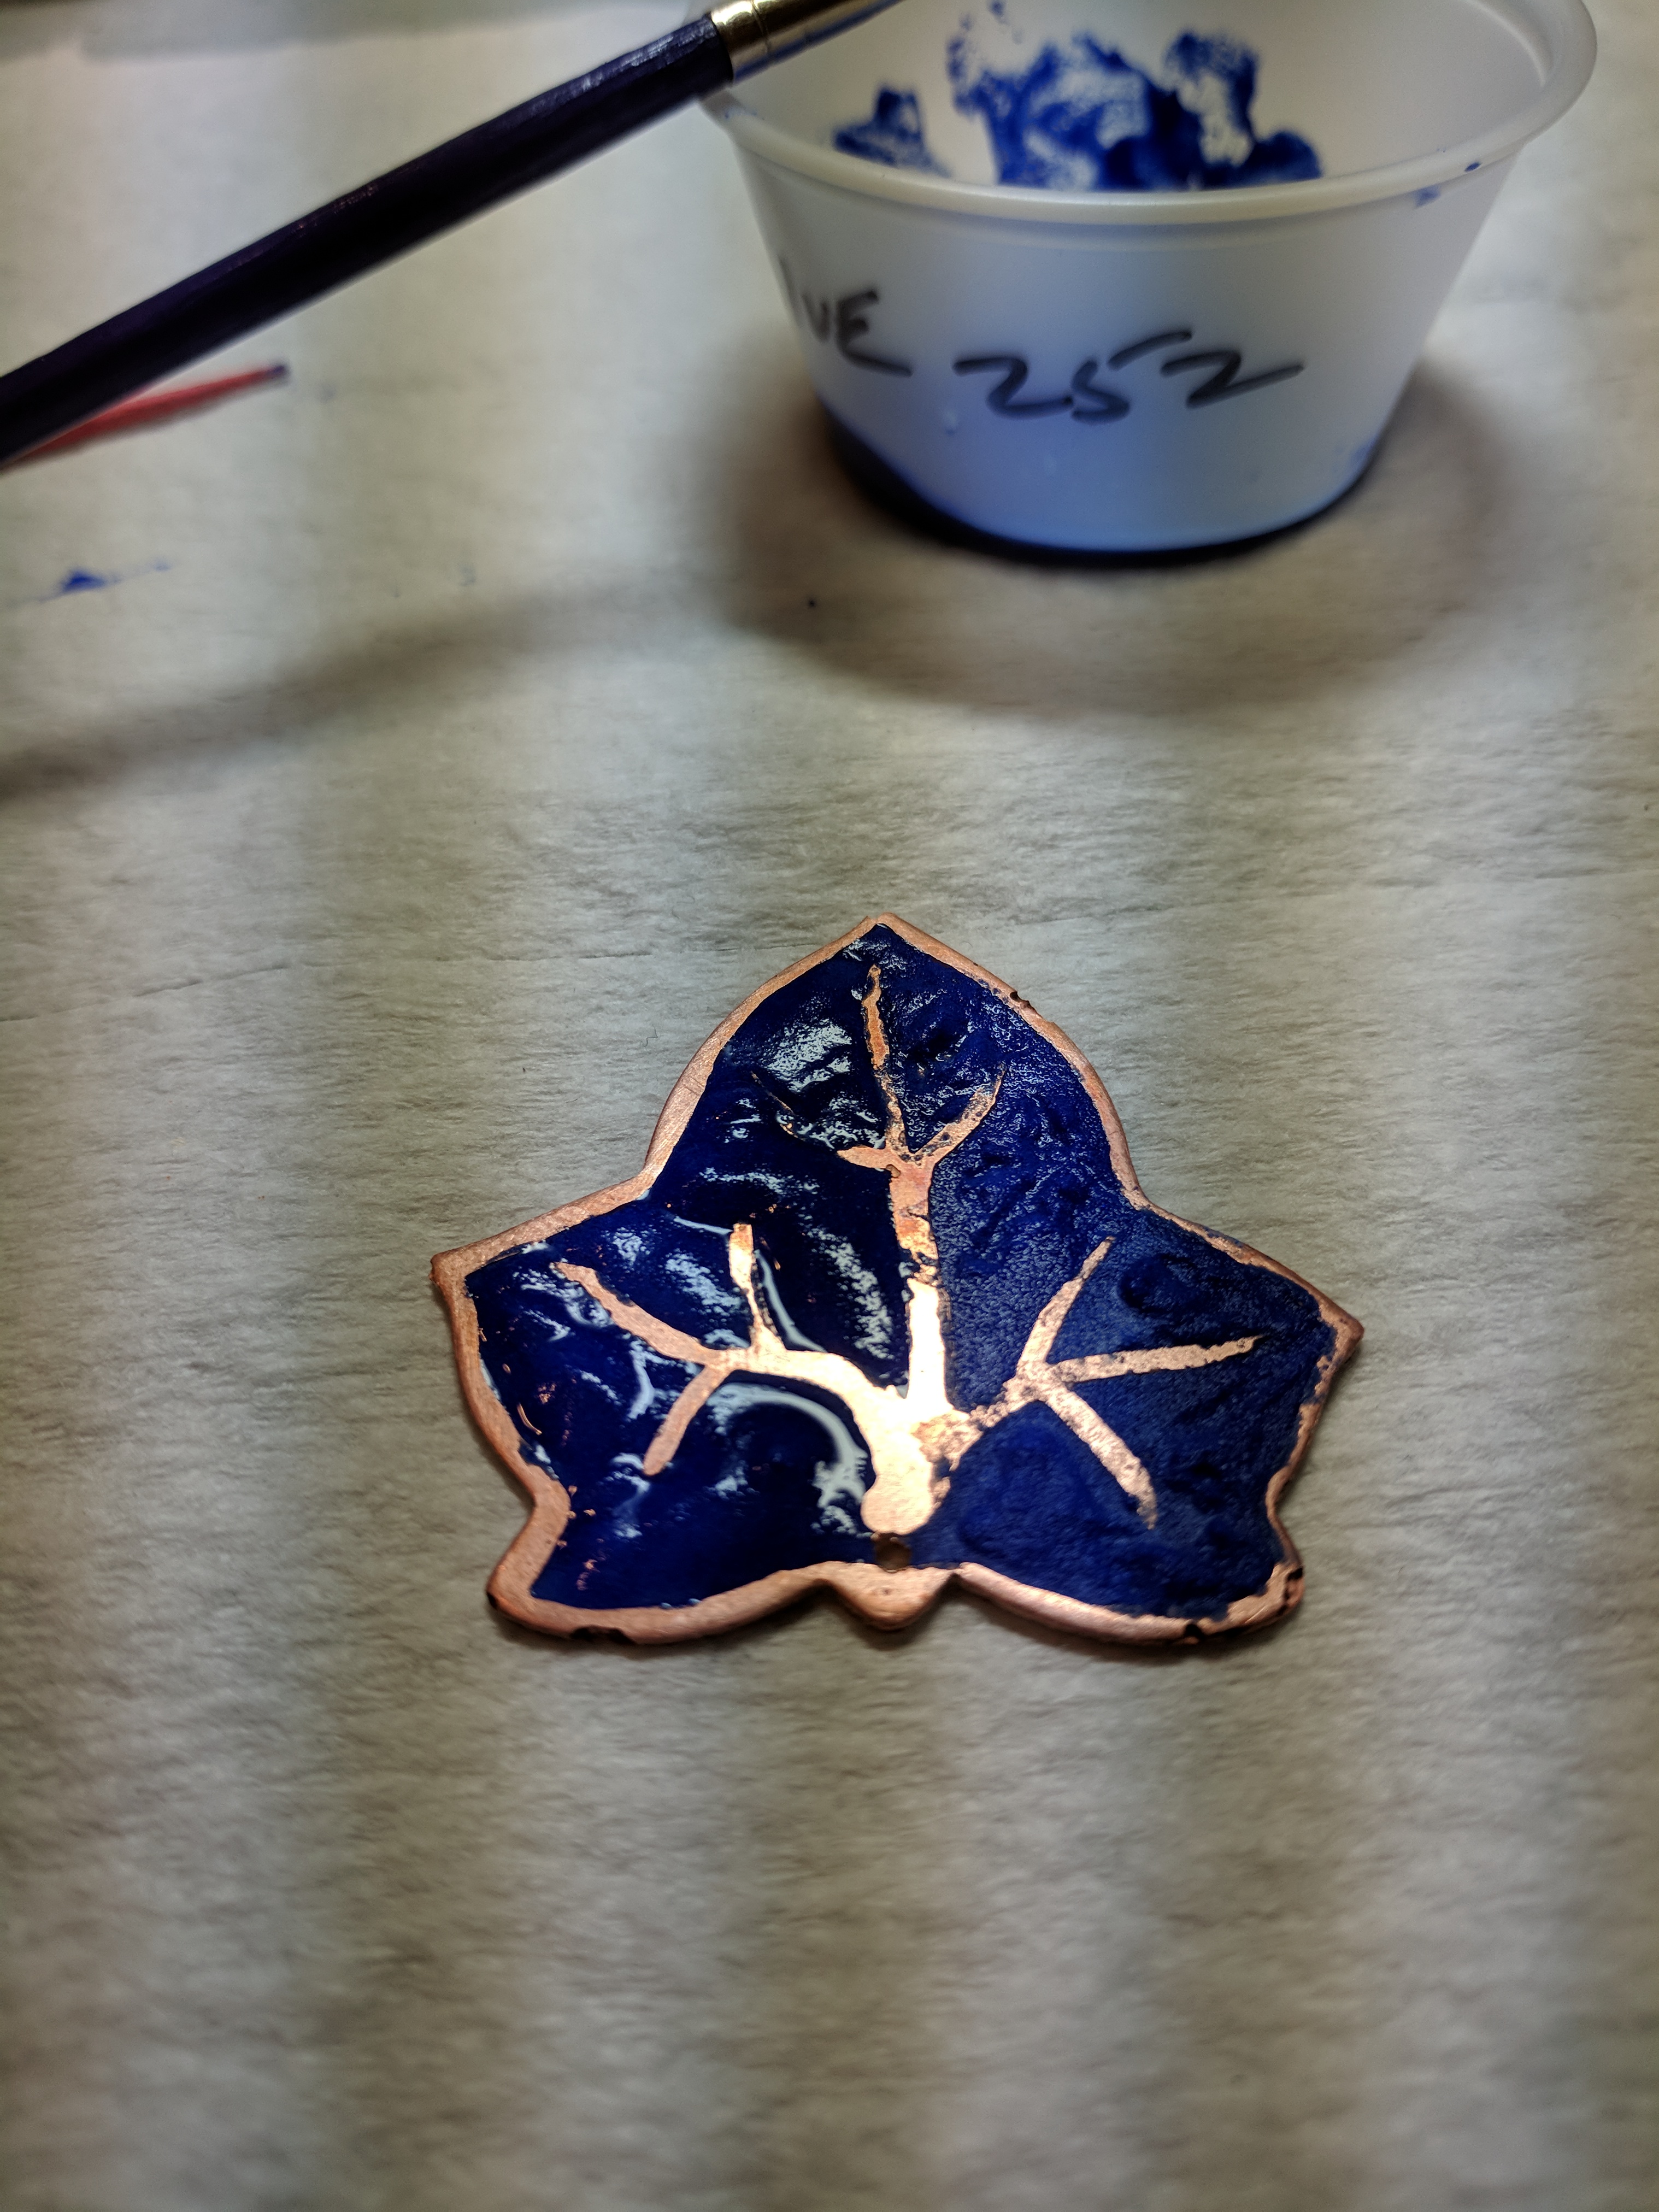 My first enameling! The copper leaf with blue enamel. Tons of fun.